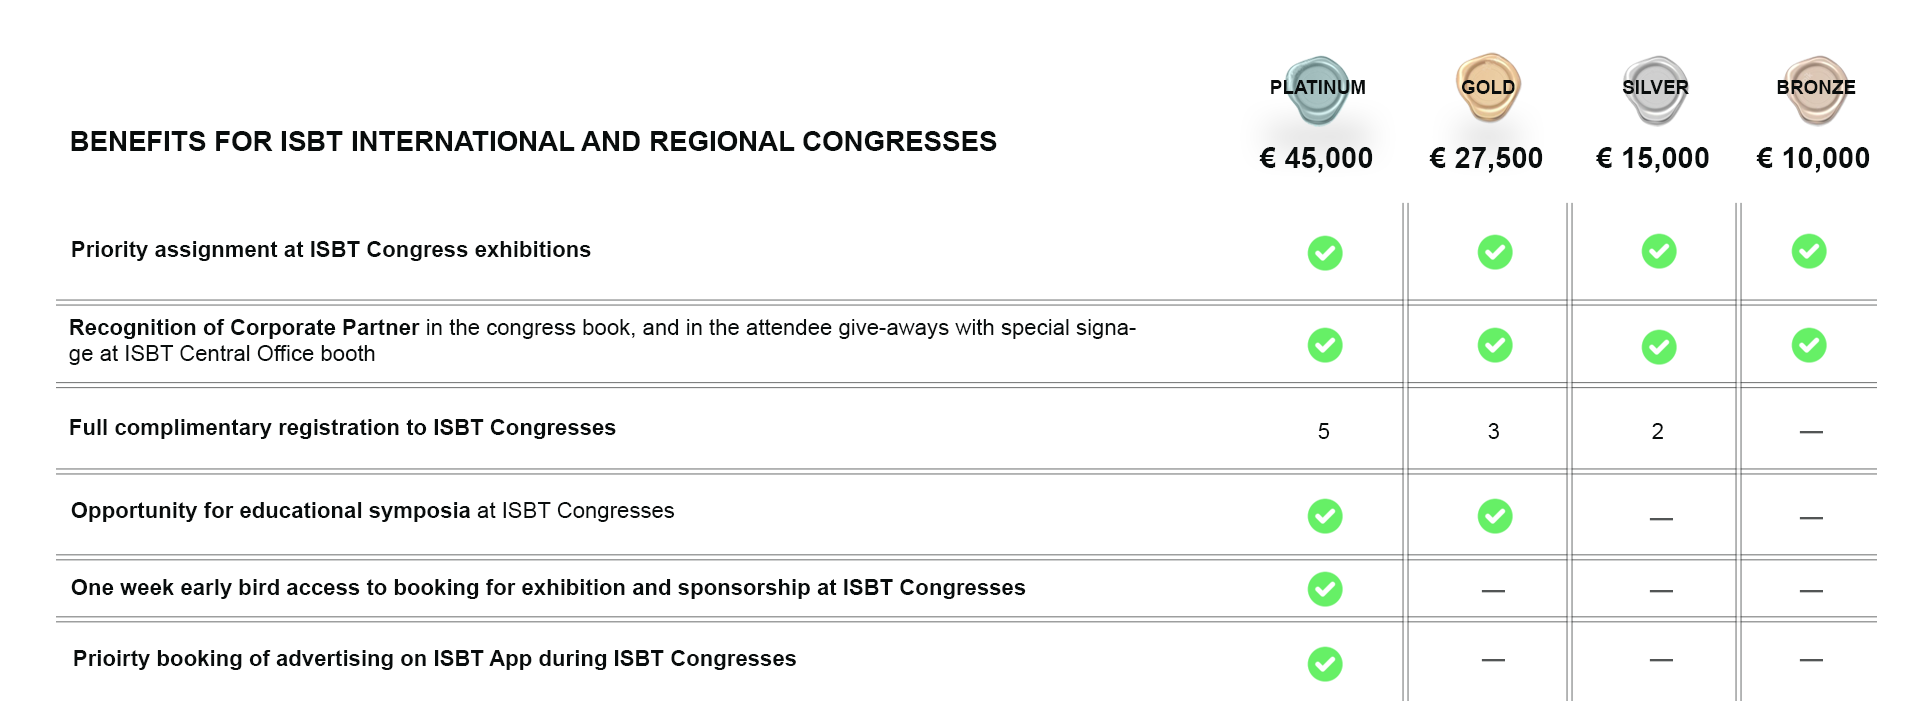 Benefits for ISBT International and Regional Congresses